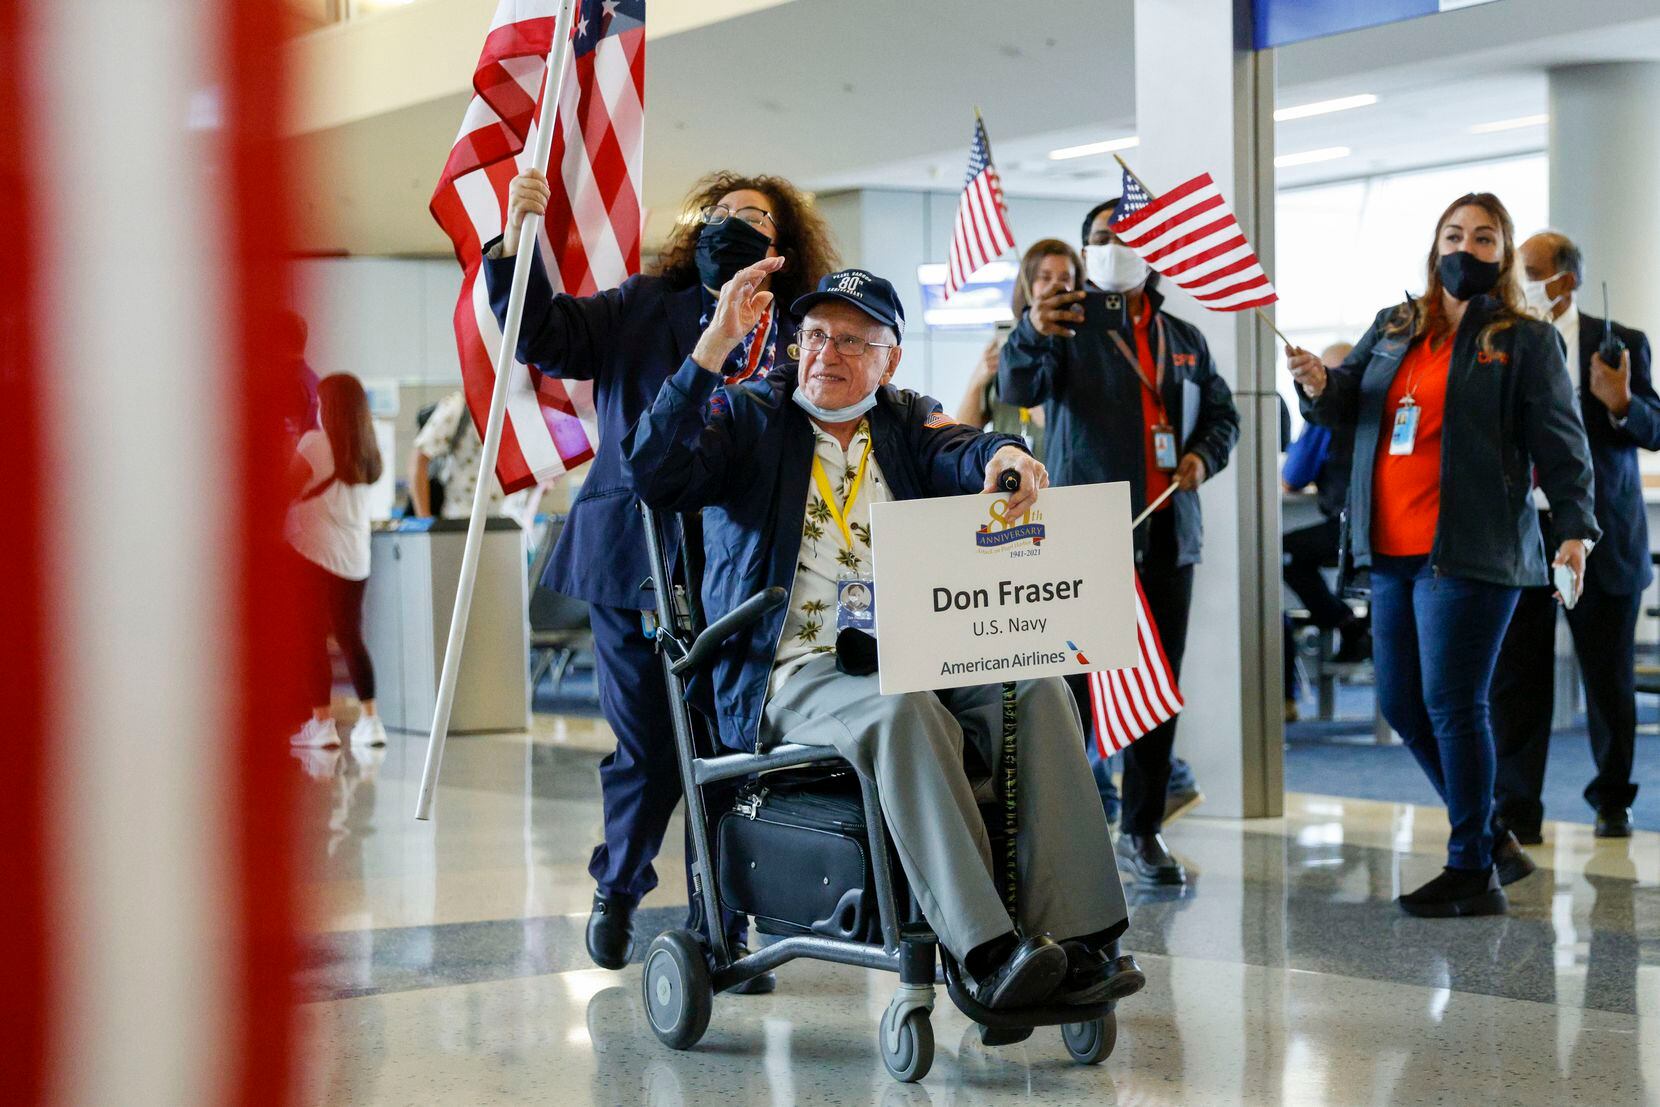 Fraser saluted onlookers during a sendoff to Hawaii at DFW International Airport on Friday, Dec. 3, 2021.